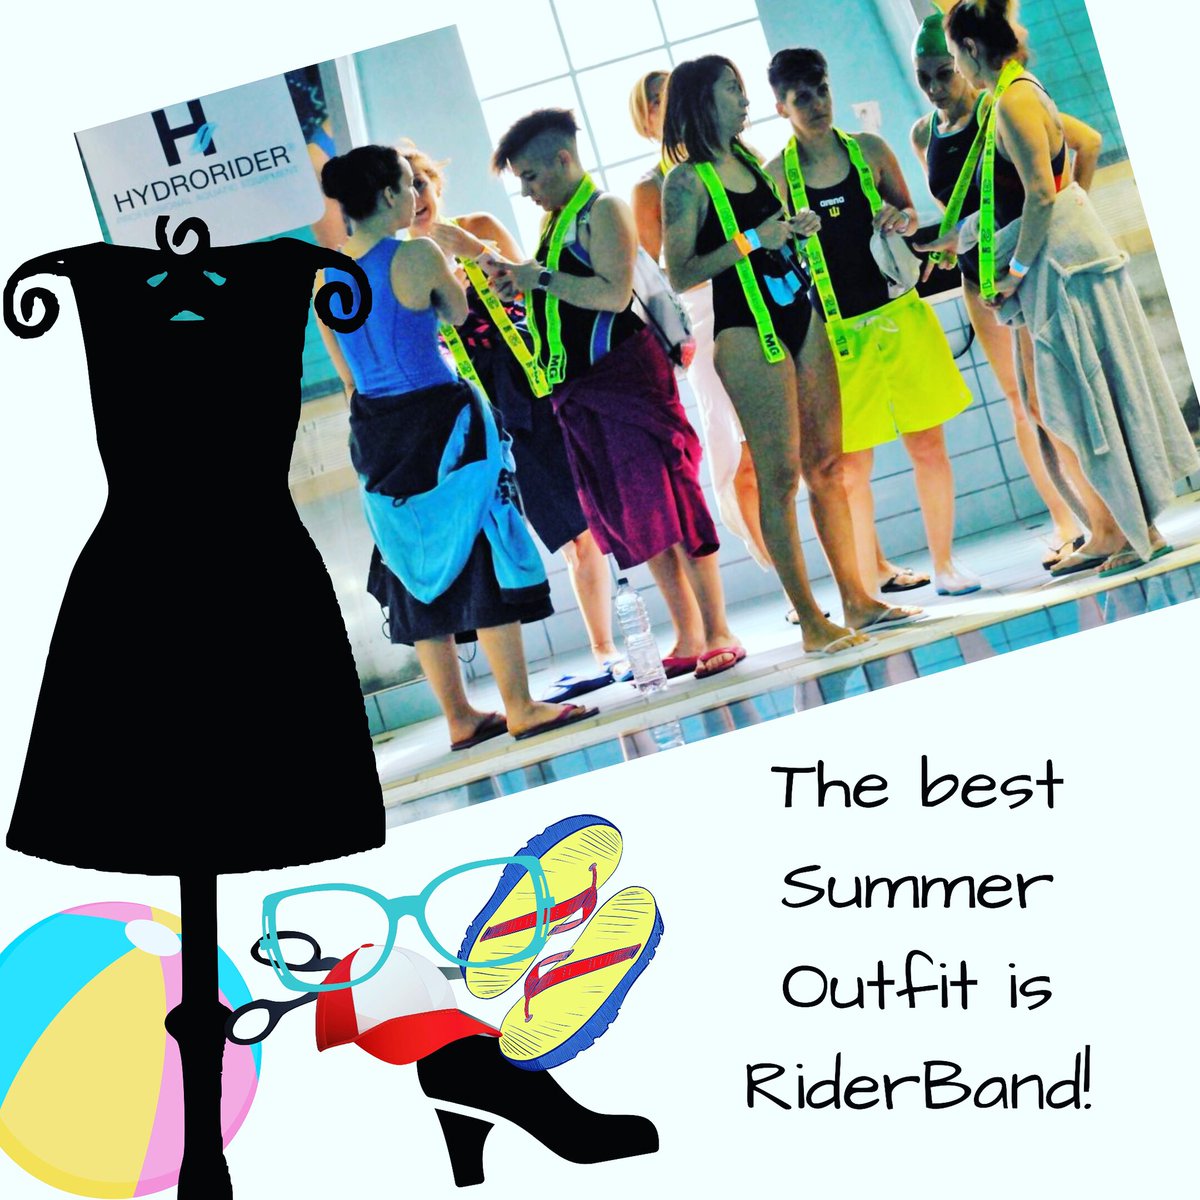 The best outfit is with RiderBand! #riderband #elasticband #functionaltraining #functionalfitness #functionalfitnesstraining #waterfitness #waterfitnesstraining #watertraining #aquaerobics #fitness #fitnesspassion